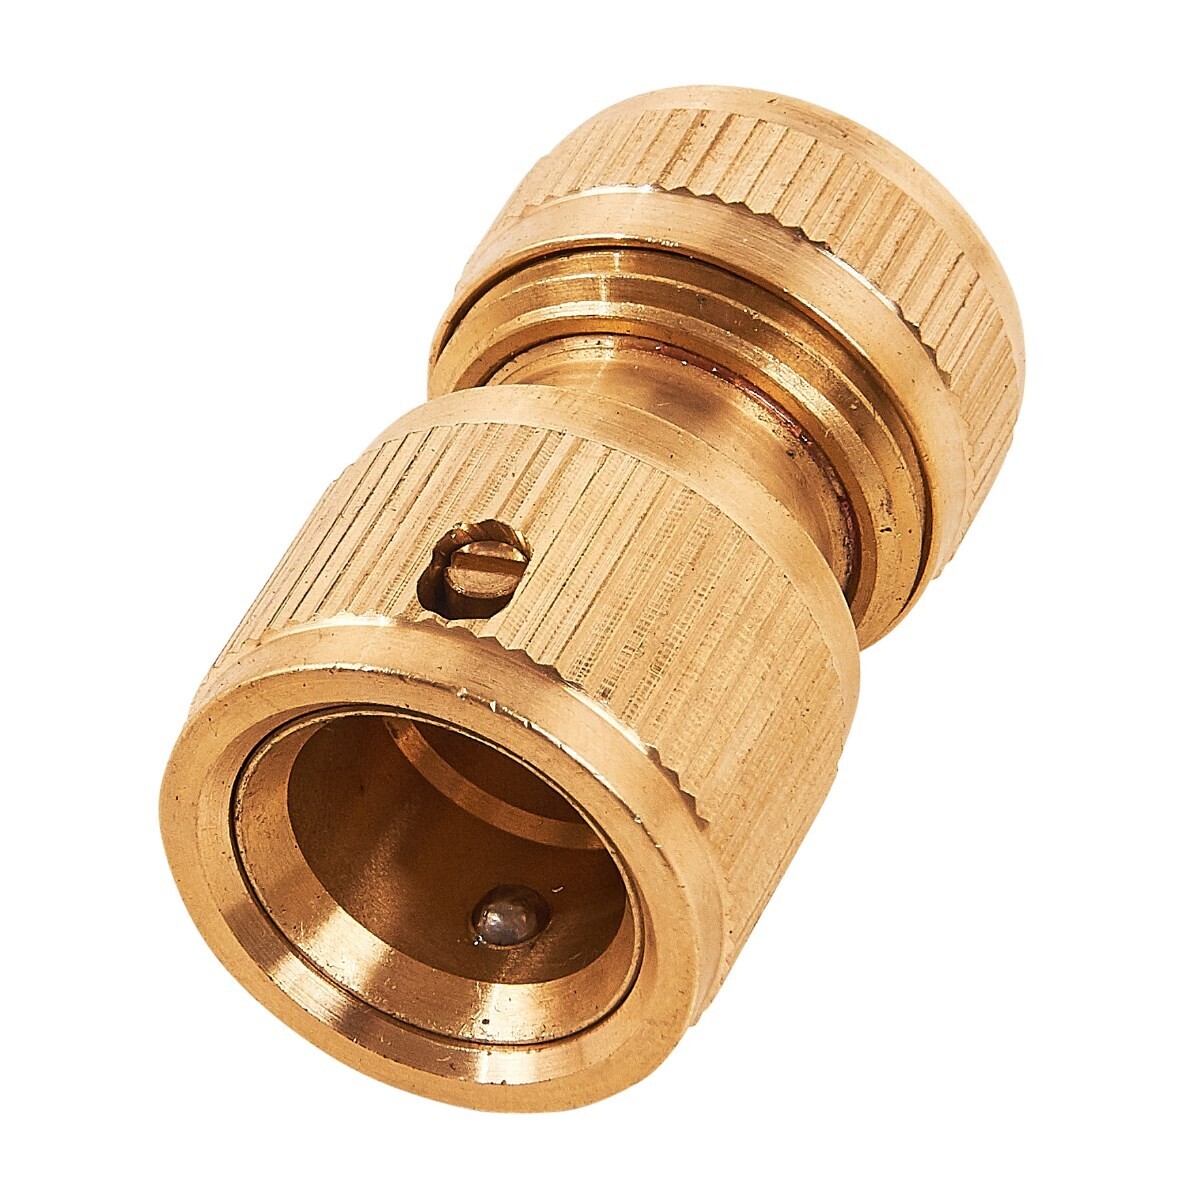 1/2” brass water-stop hose connector